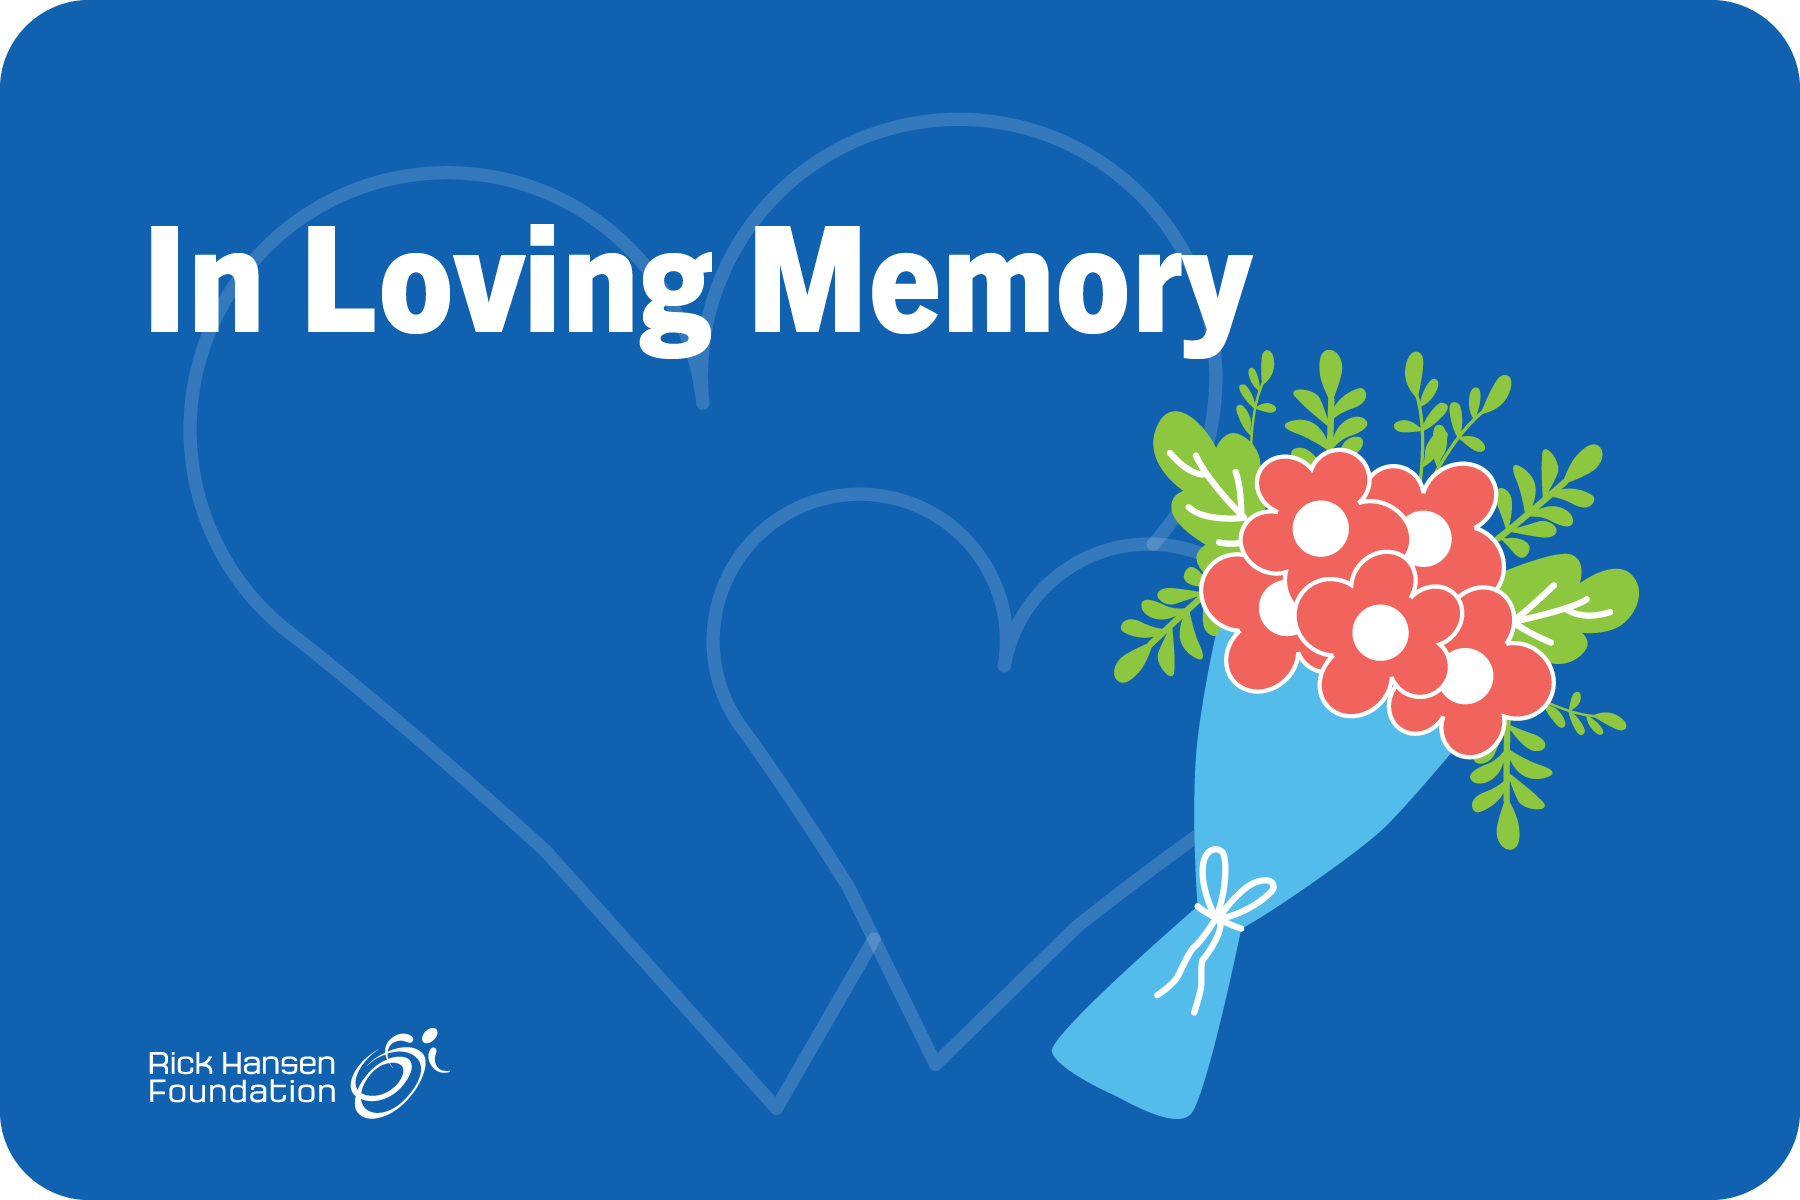 Blue background with two large transparent hearts. There is a colourful bouquet of flowers and white text that reads “In Loving Memory”. The Rick Hansen Foundation logo is in the bottom left corner.